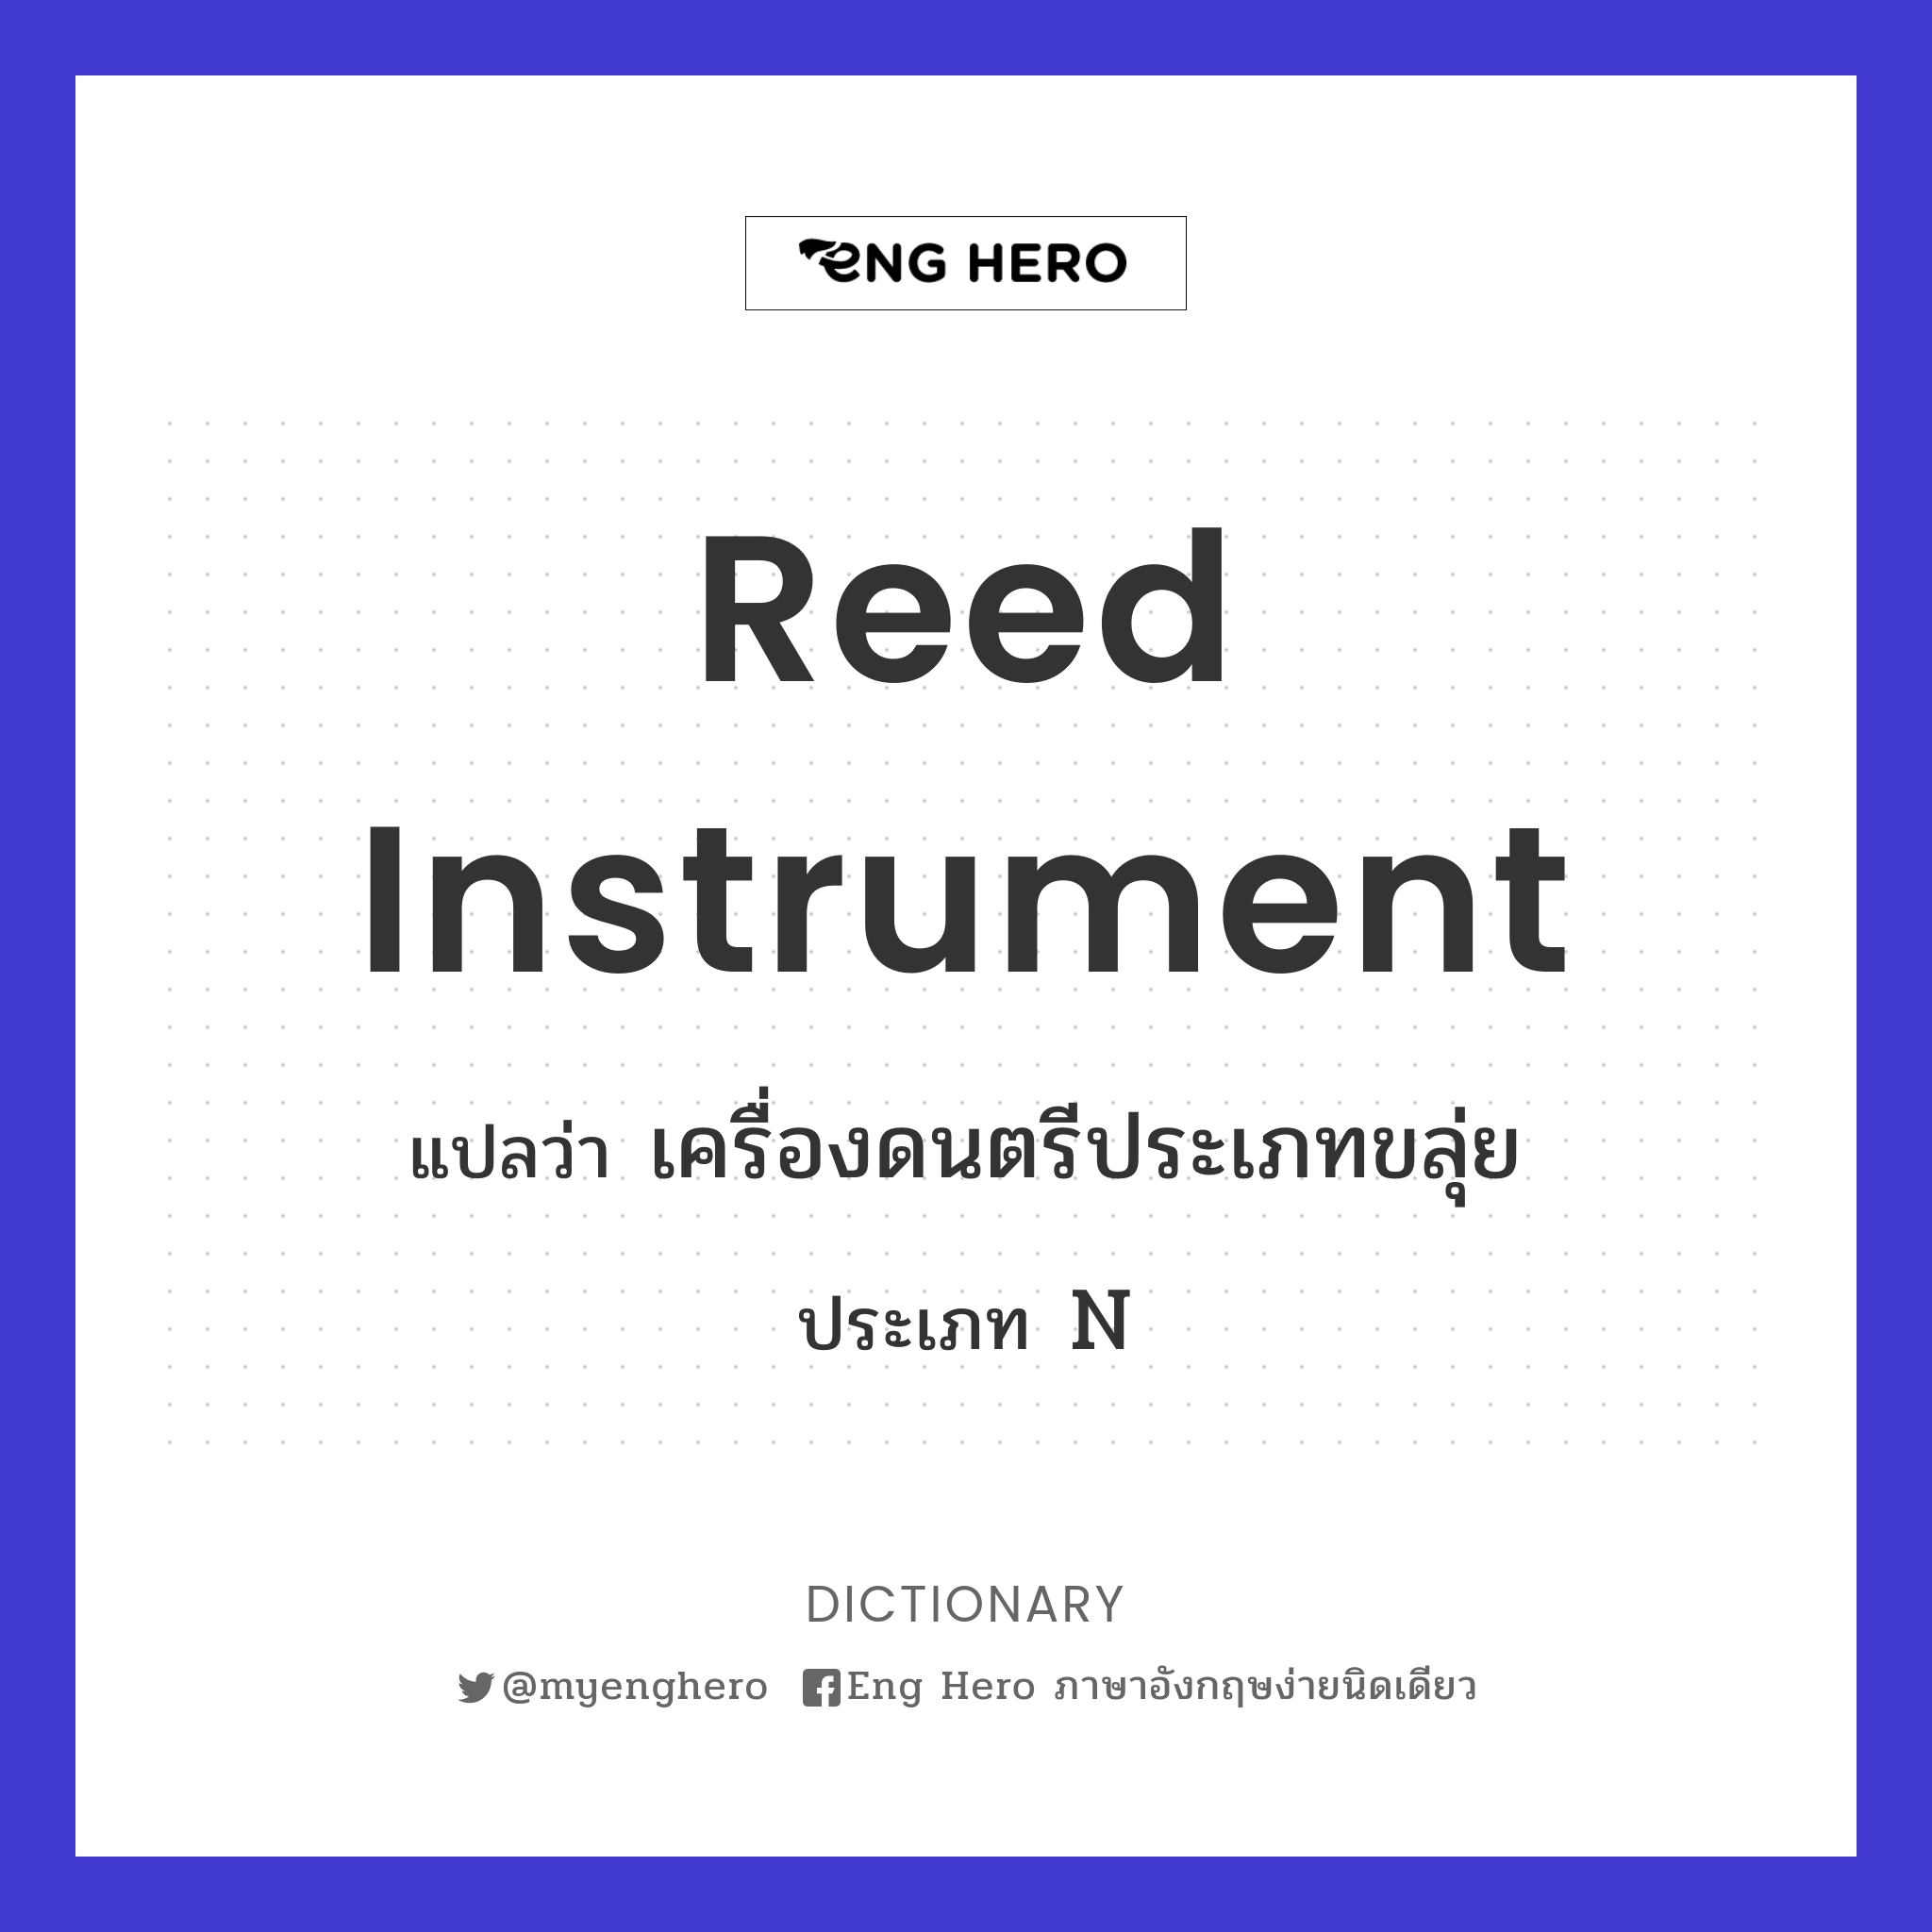 reed instrument